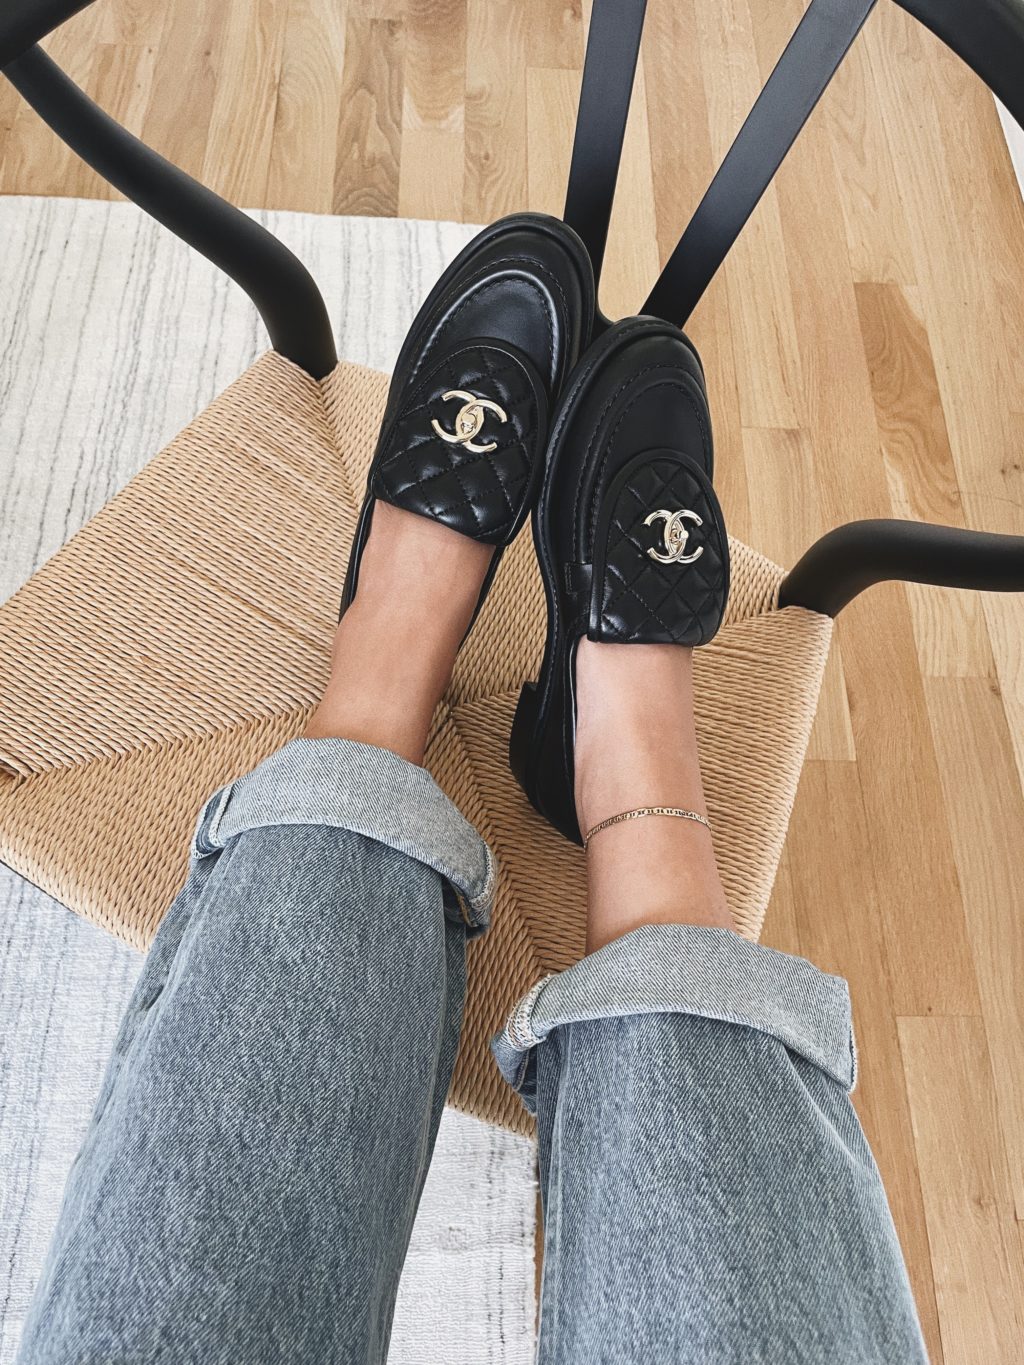 Chanel Quilted Loafer Review | The Teacher Diva: a Dallas Fashion Blog  featuring Beauty & Lifestyle